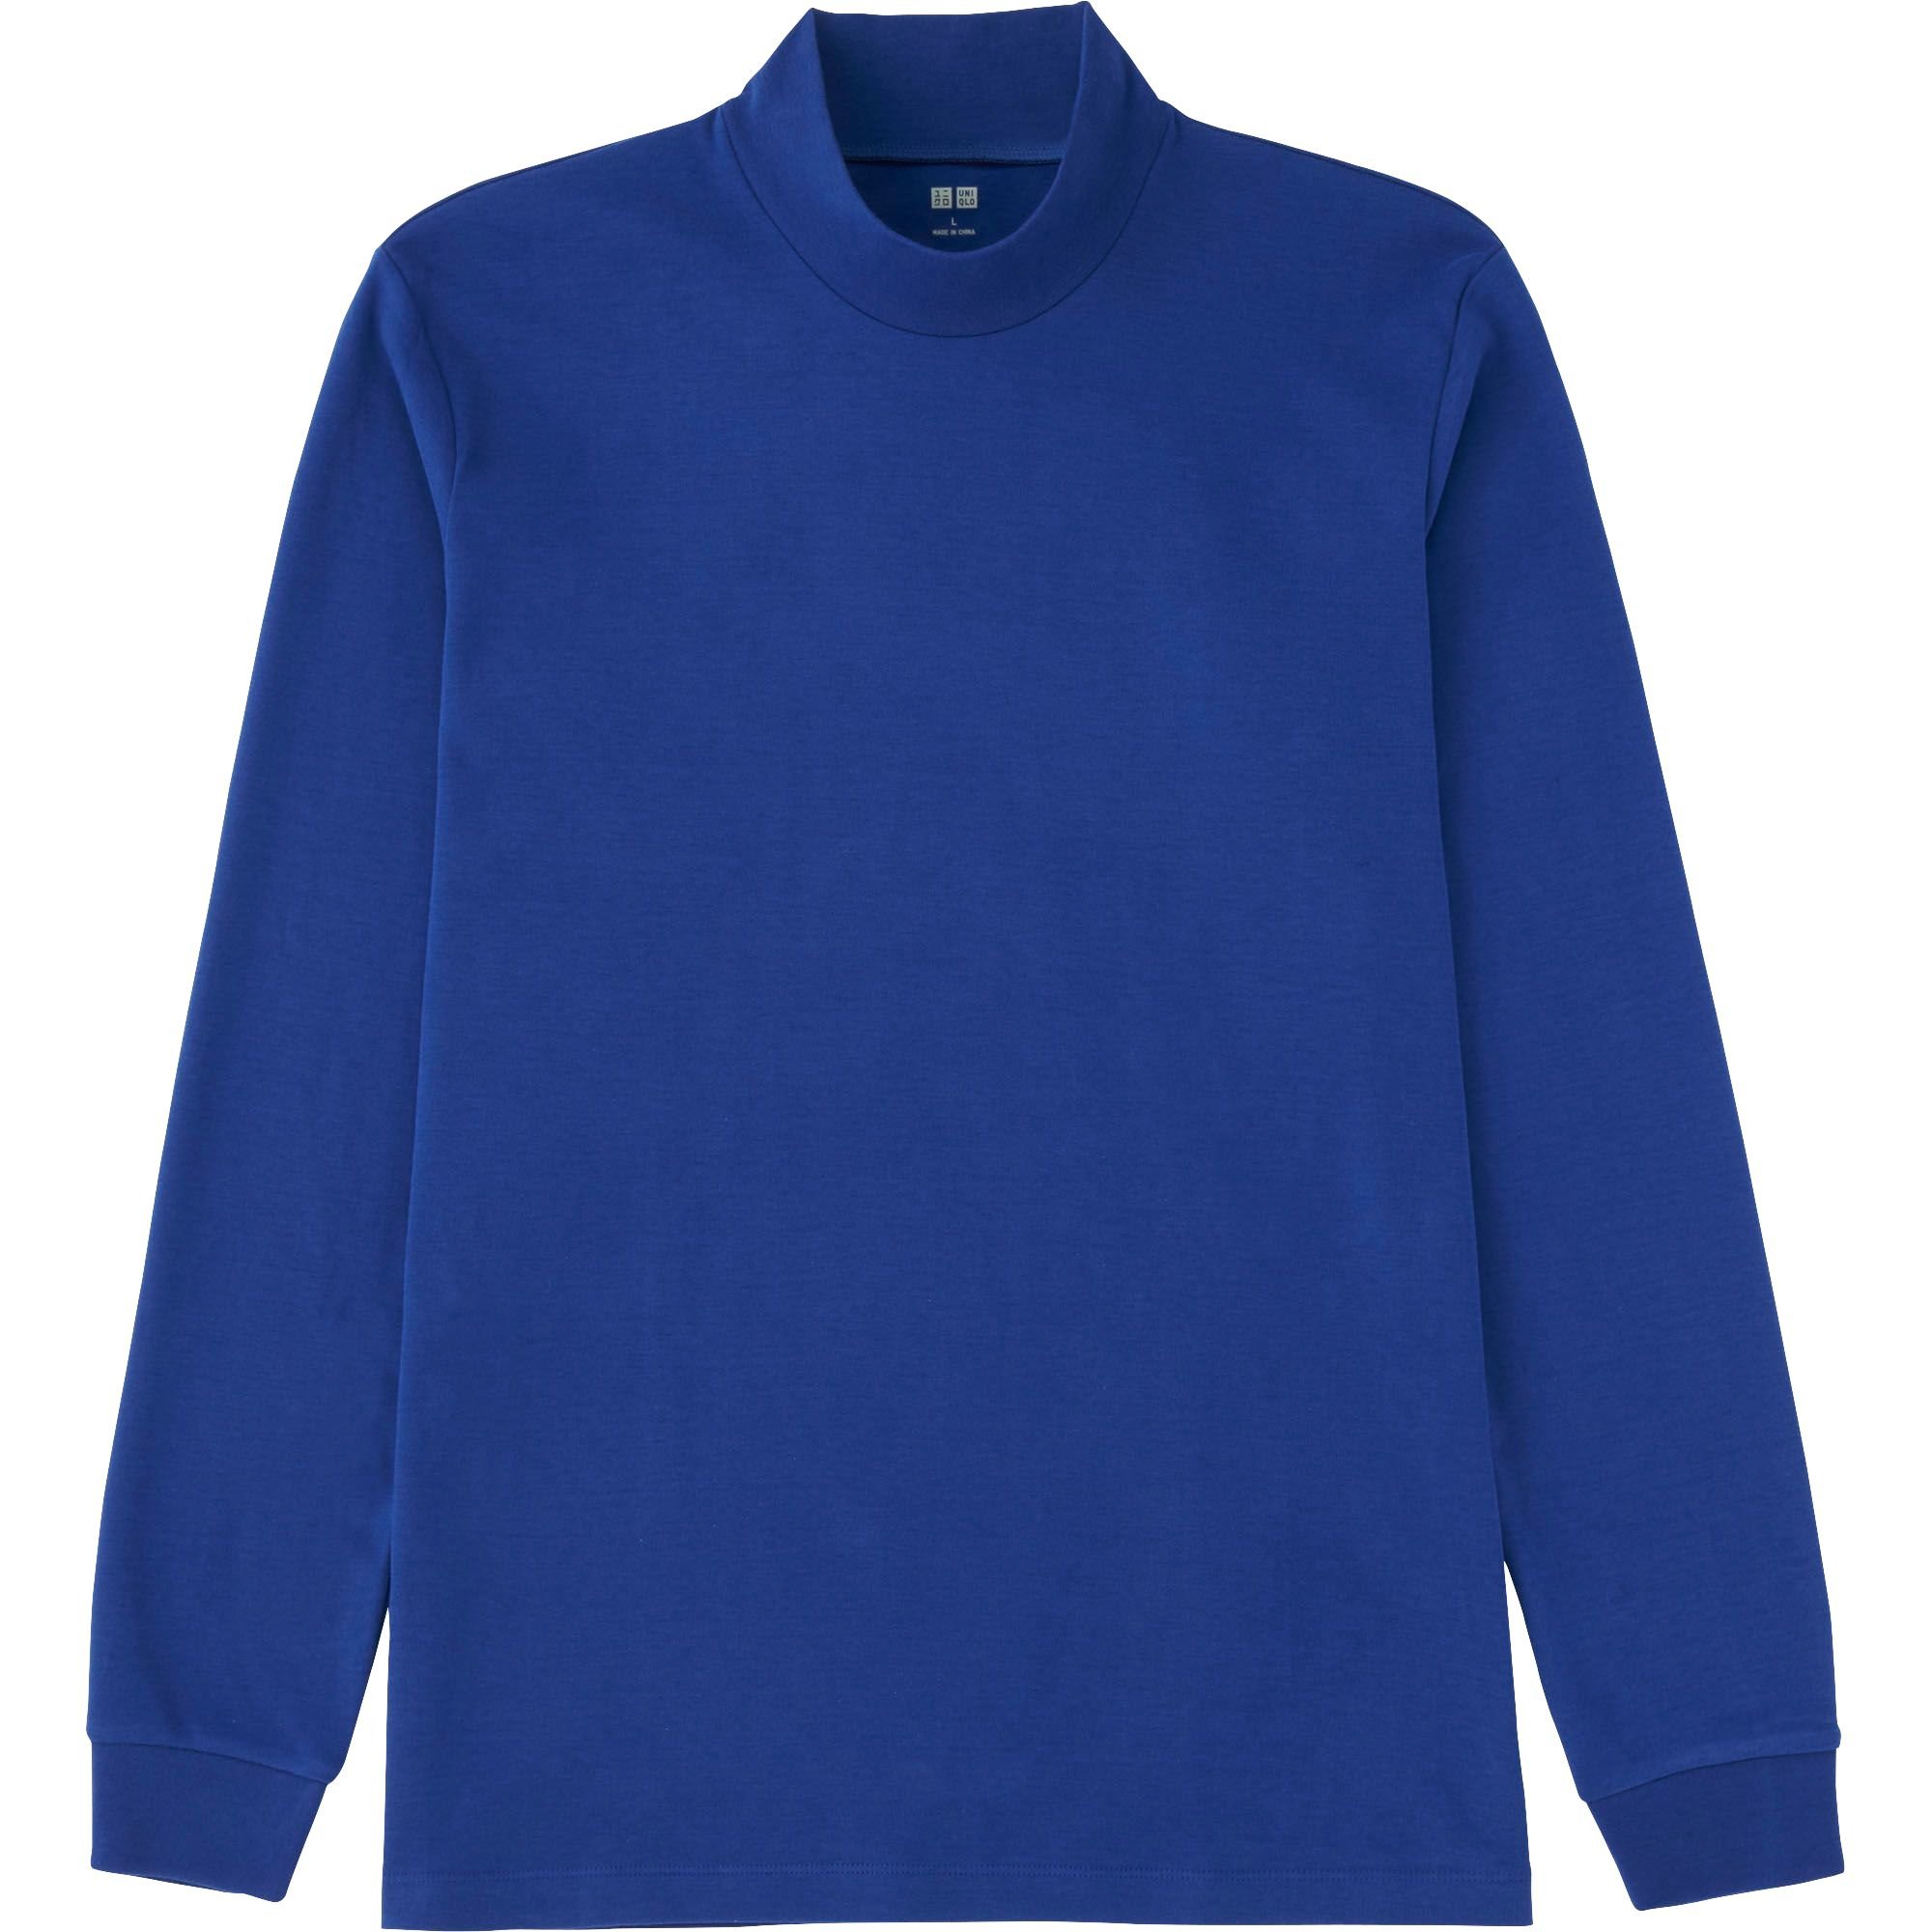 Download Uniqlo Men Soft Touch Mock Neck Long-sleeve T-shirt in ...